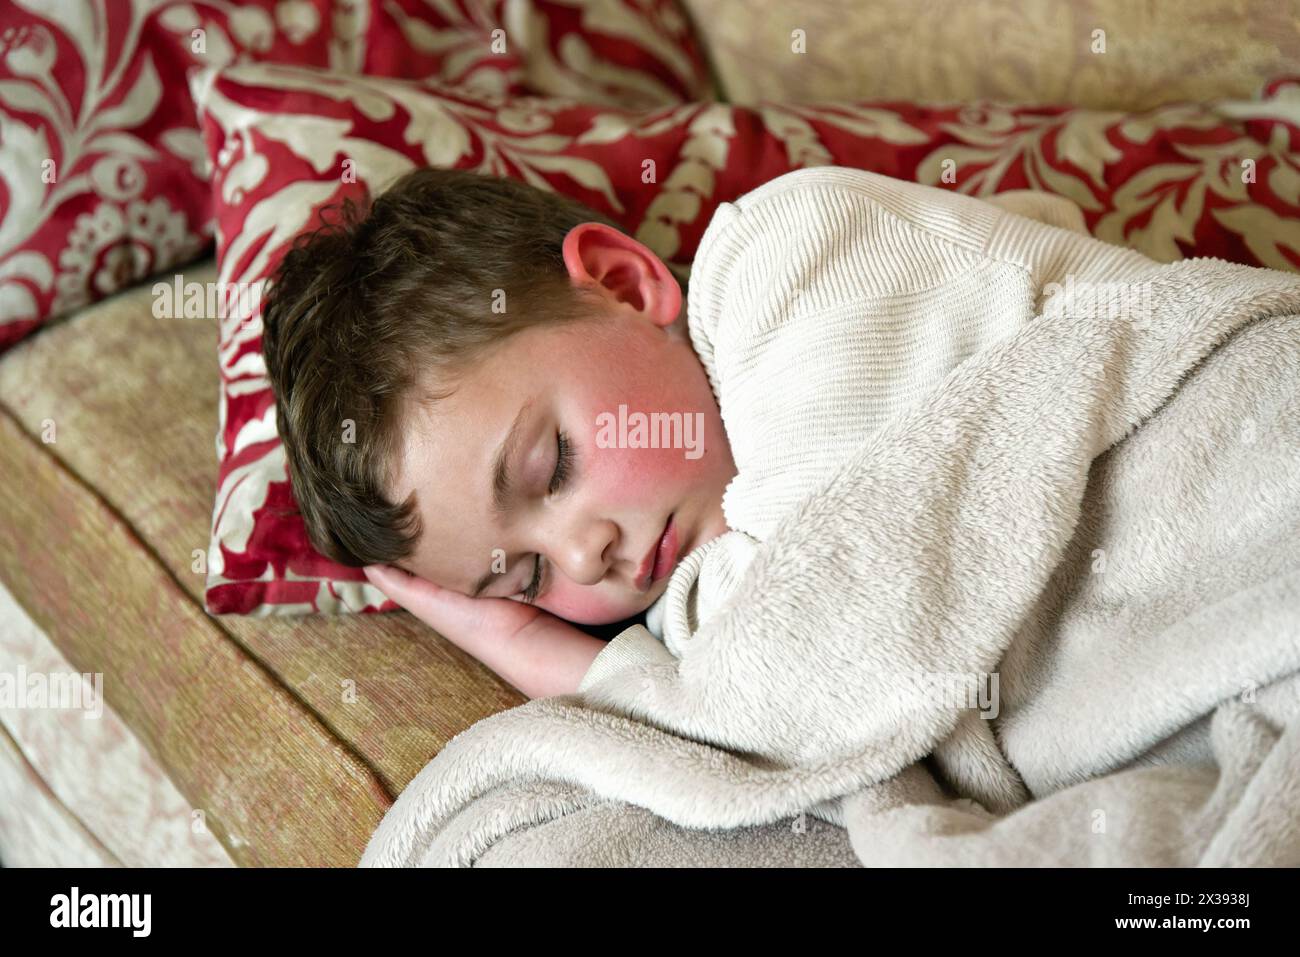 A young five year old boy fast asleep on a couch with his head on his hand Stock Photo